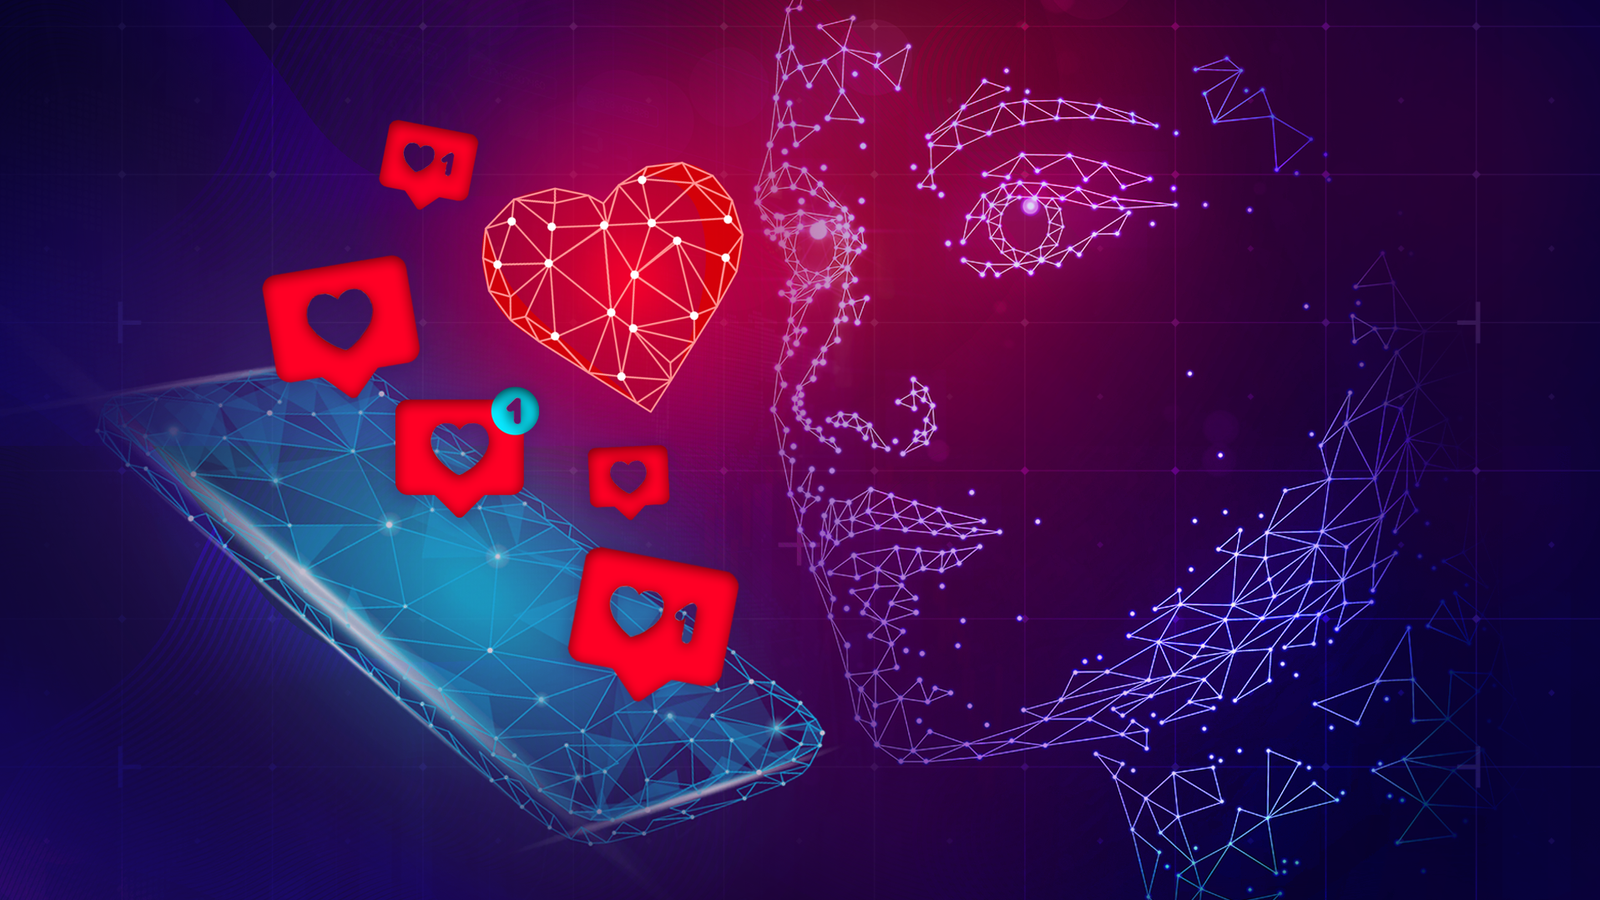 Creepy catfish or useful co-pilot: Can AI help with dating app success?